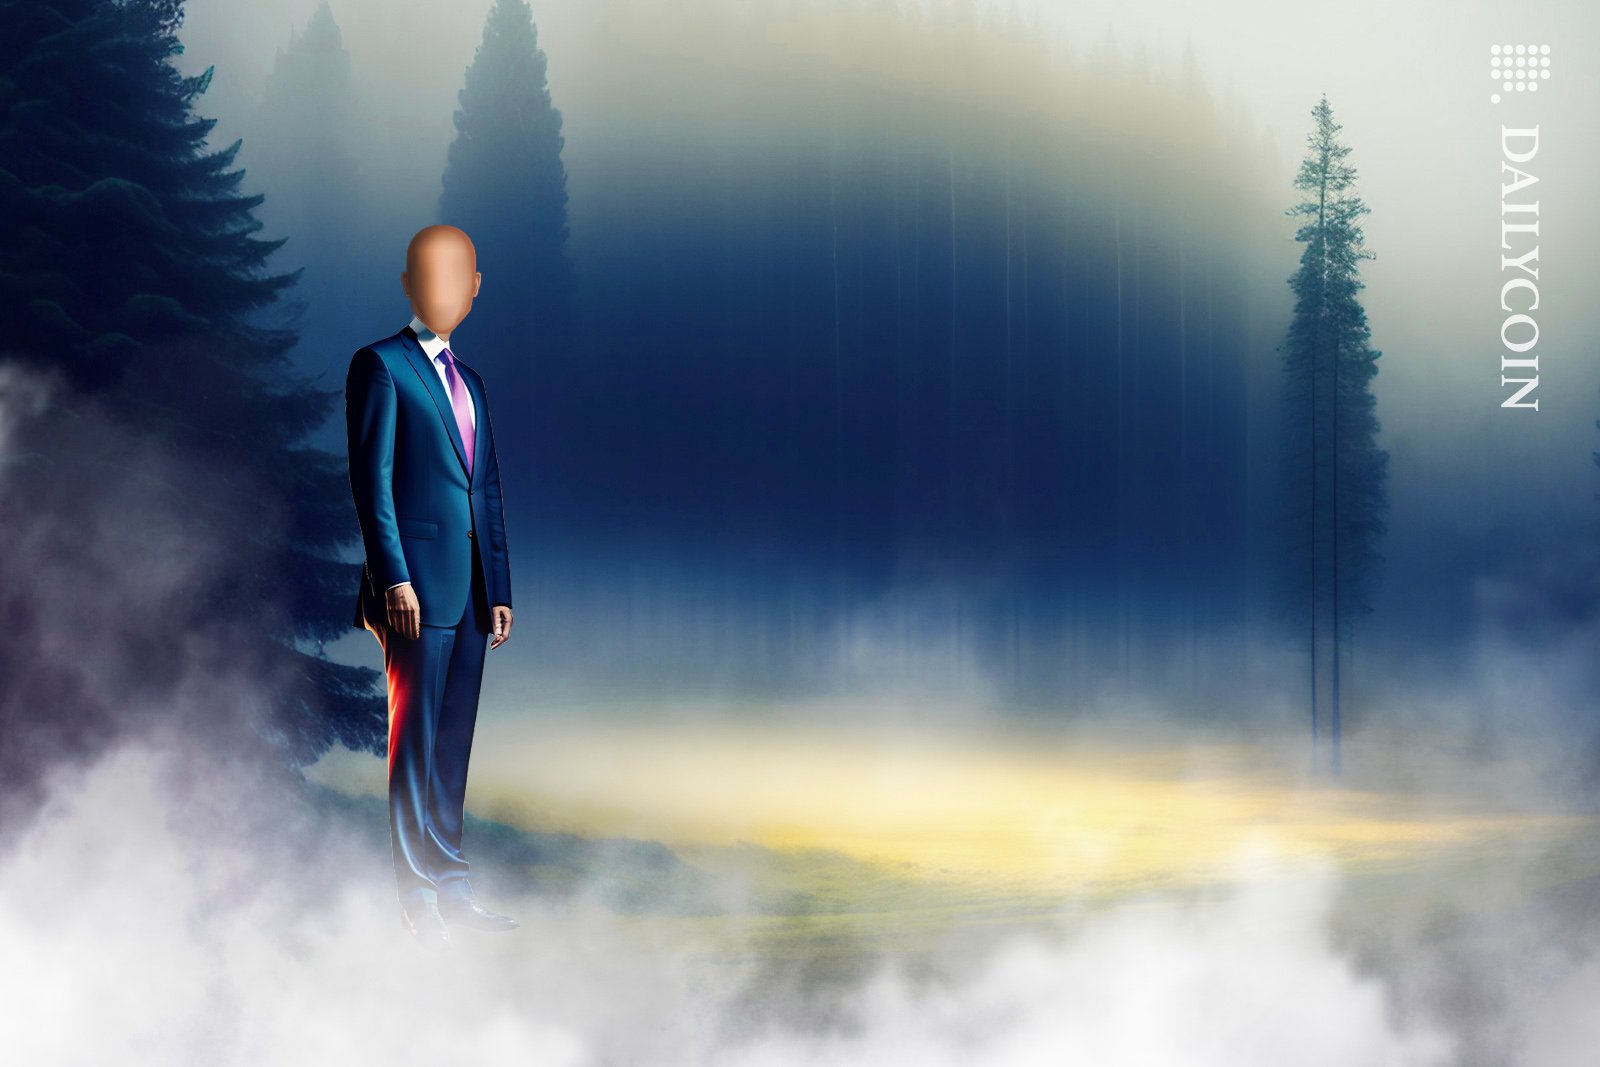 Mysterious faceless character wearing a suit, standing in a field surrounded by fog.